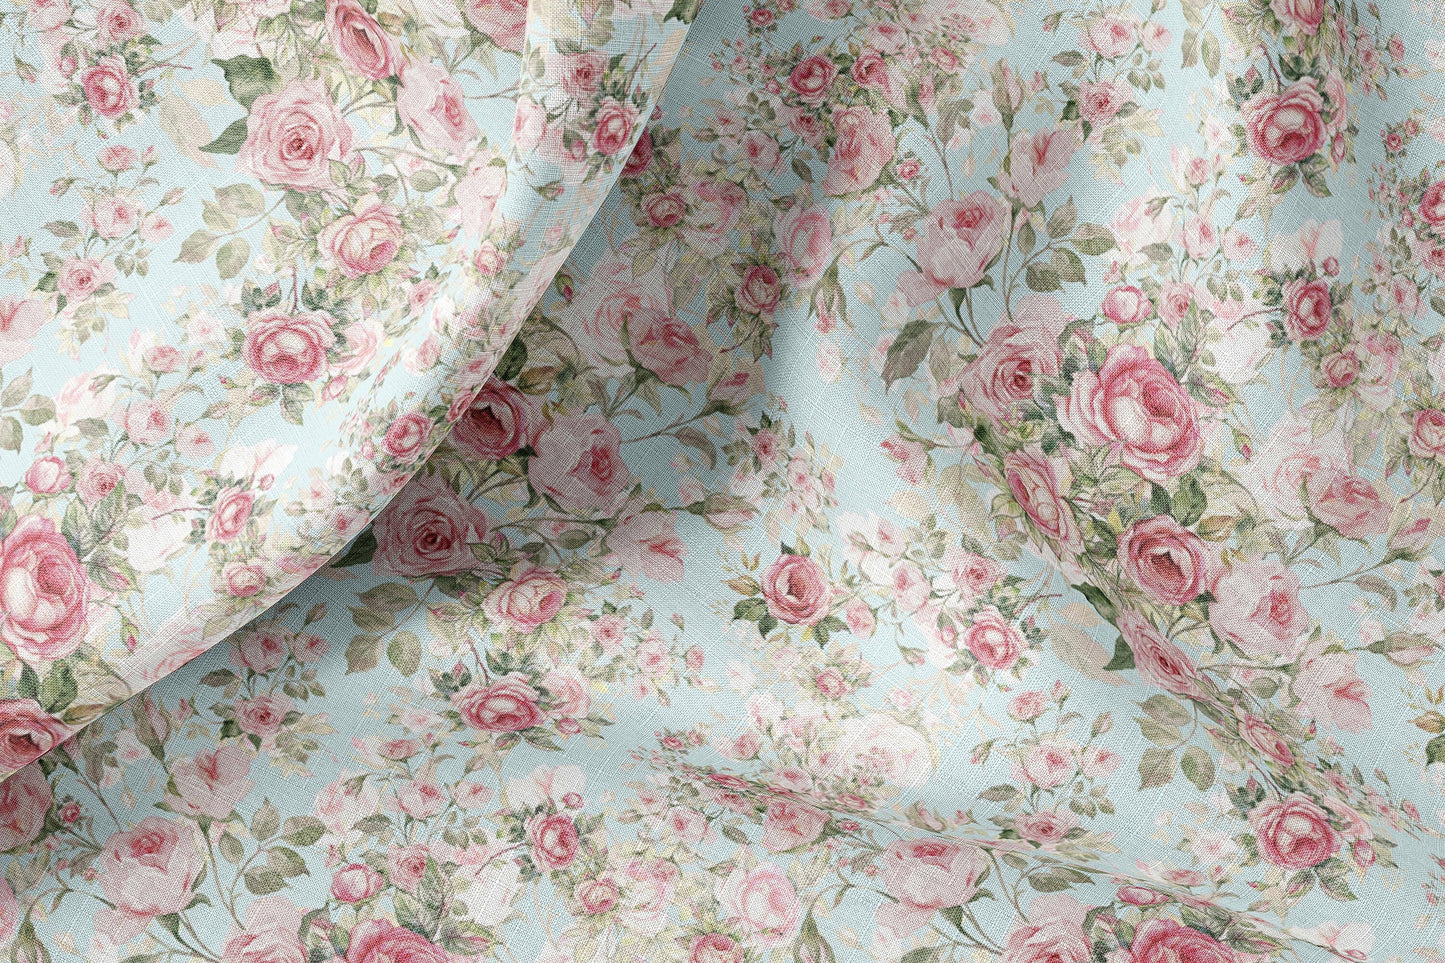 Vintage Linen By The Yard or Meter, Vintage Roses Print Linen Fabric For Bedding, Curtains, Dresses, Clothing, Table Cloth & Pillow Covers